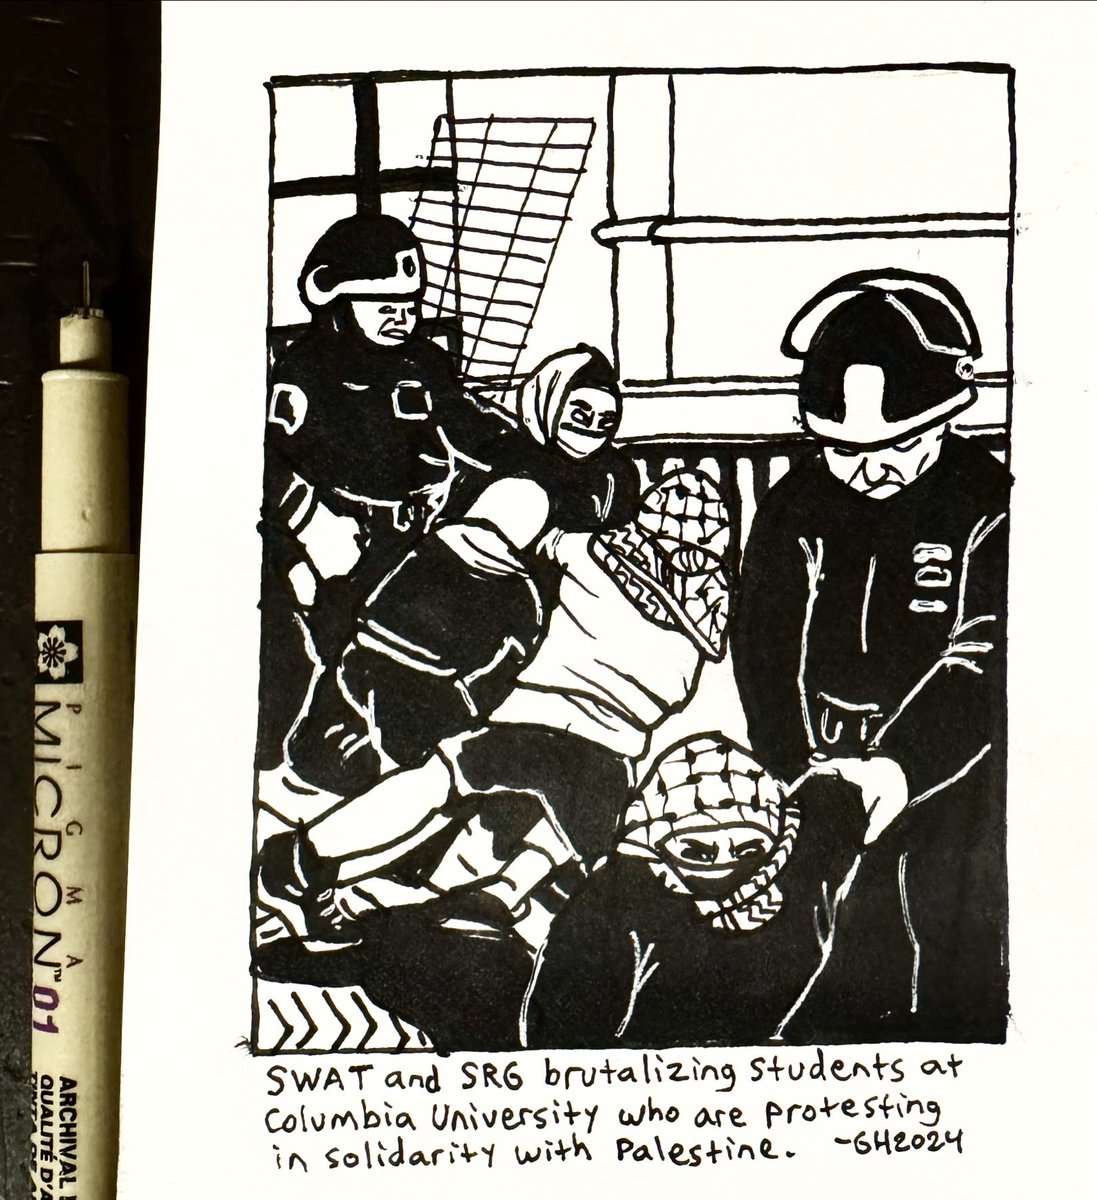 Here is a drawing I did in my sketchbook of SWAT and SRG (strategic response group) brutalizing students at Columbia University who are protesting in solidarity with Palestine. All press have been forced out to prevent recordings.